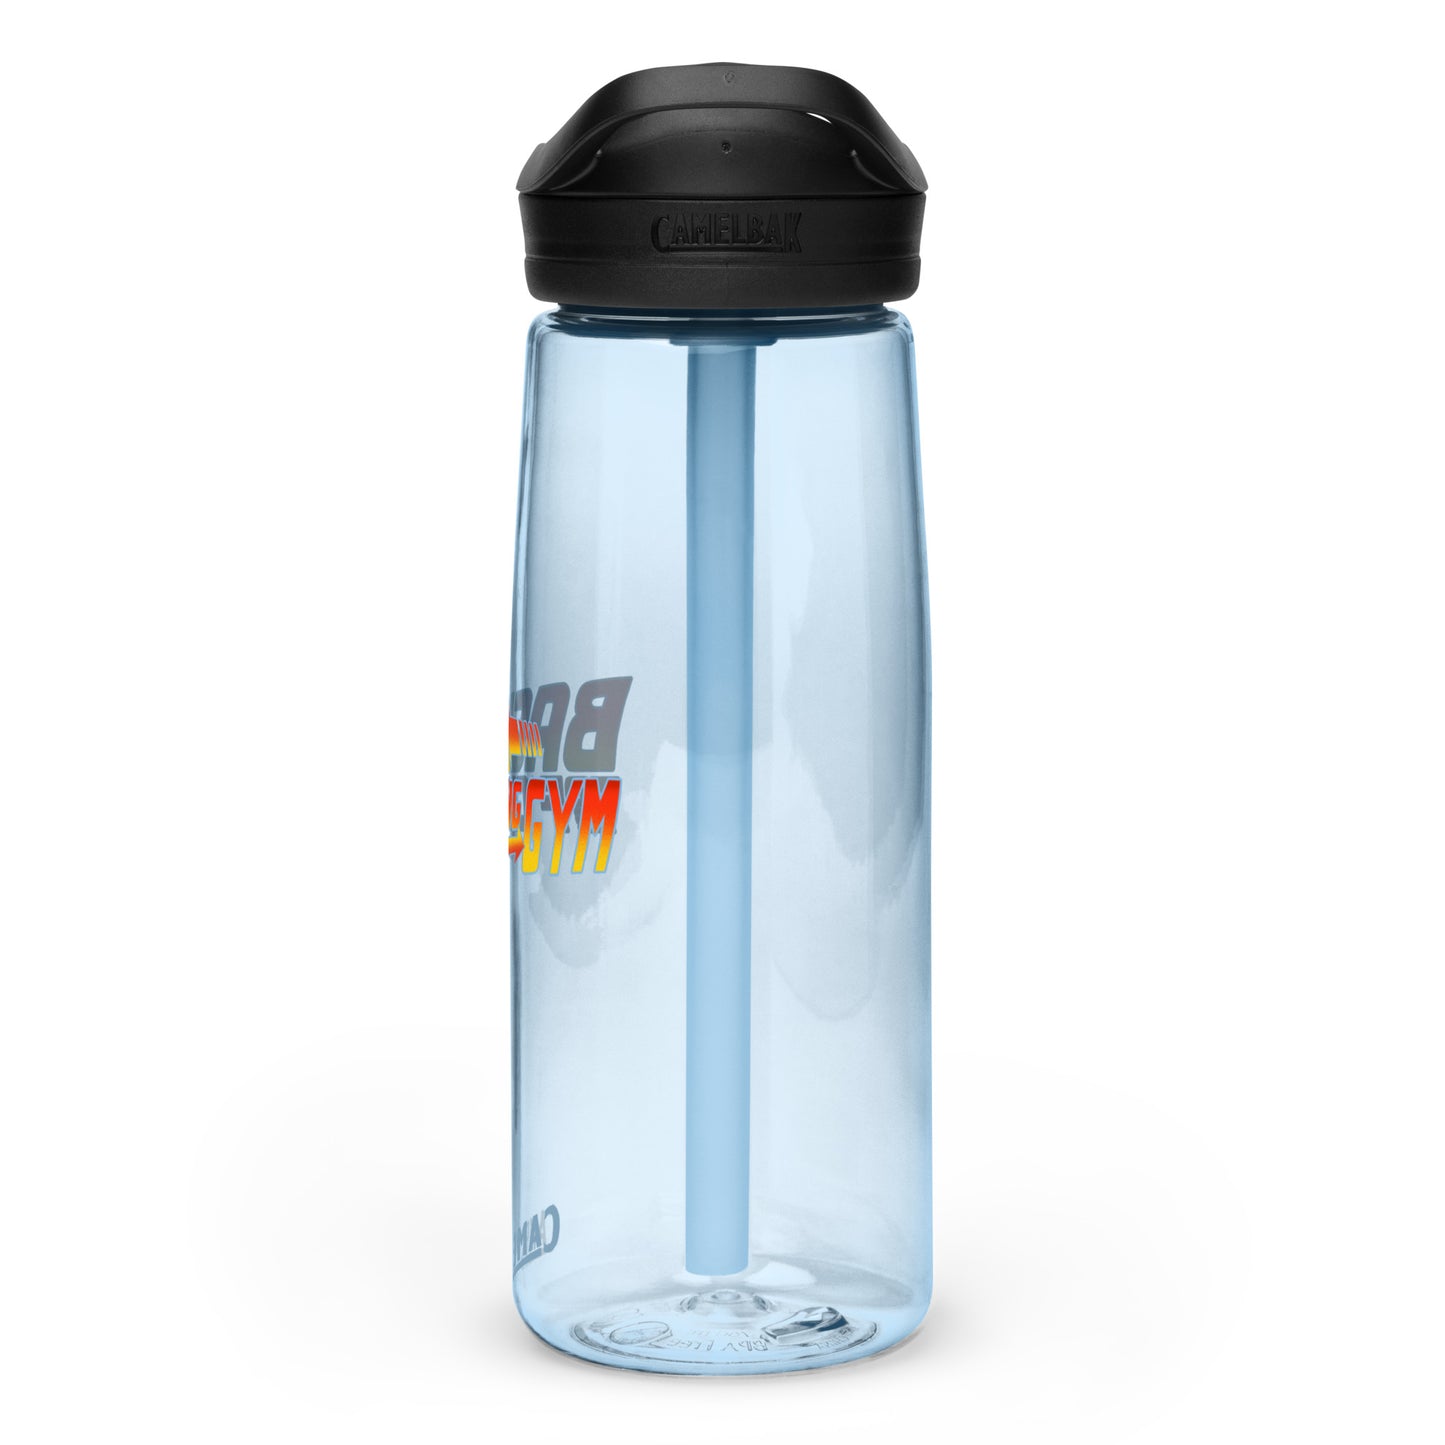 Back To The F*cking Gym (Text) Water Bottle